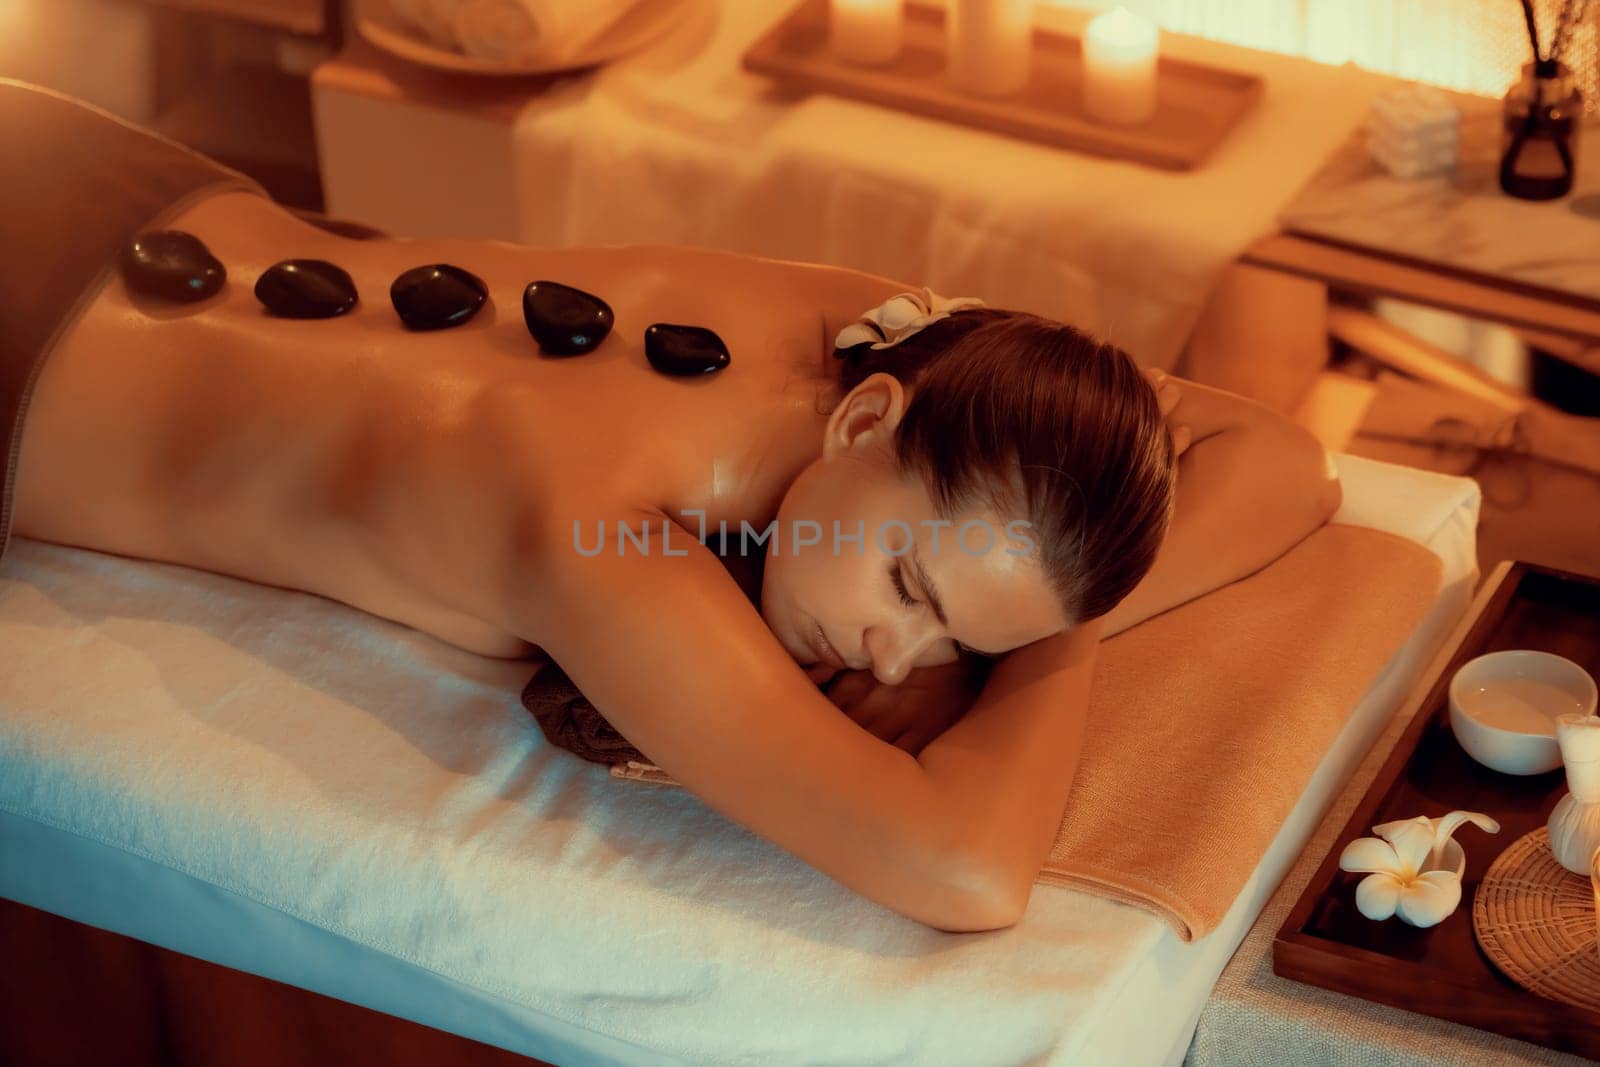 Hot stone massage at spa salon in luxury resort with warm candle light.Quiescent by biancoblue